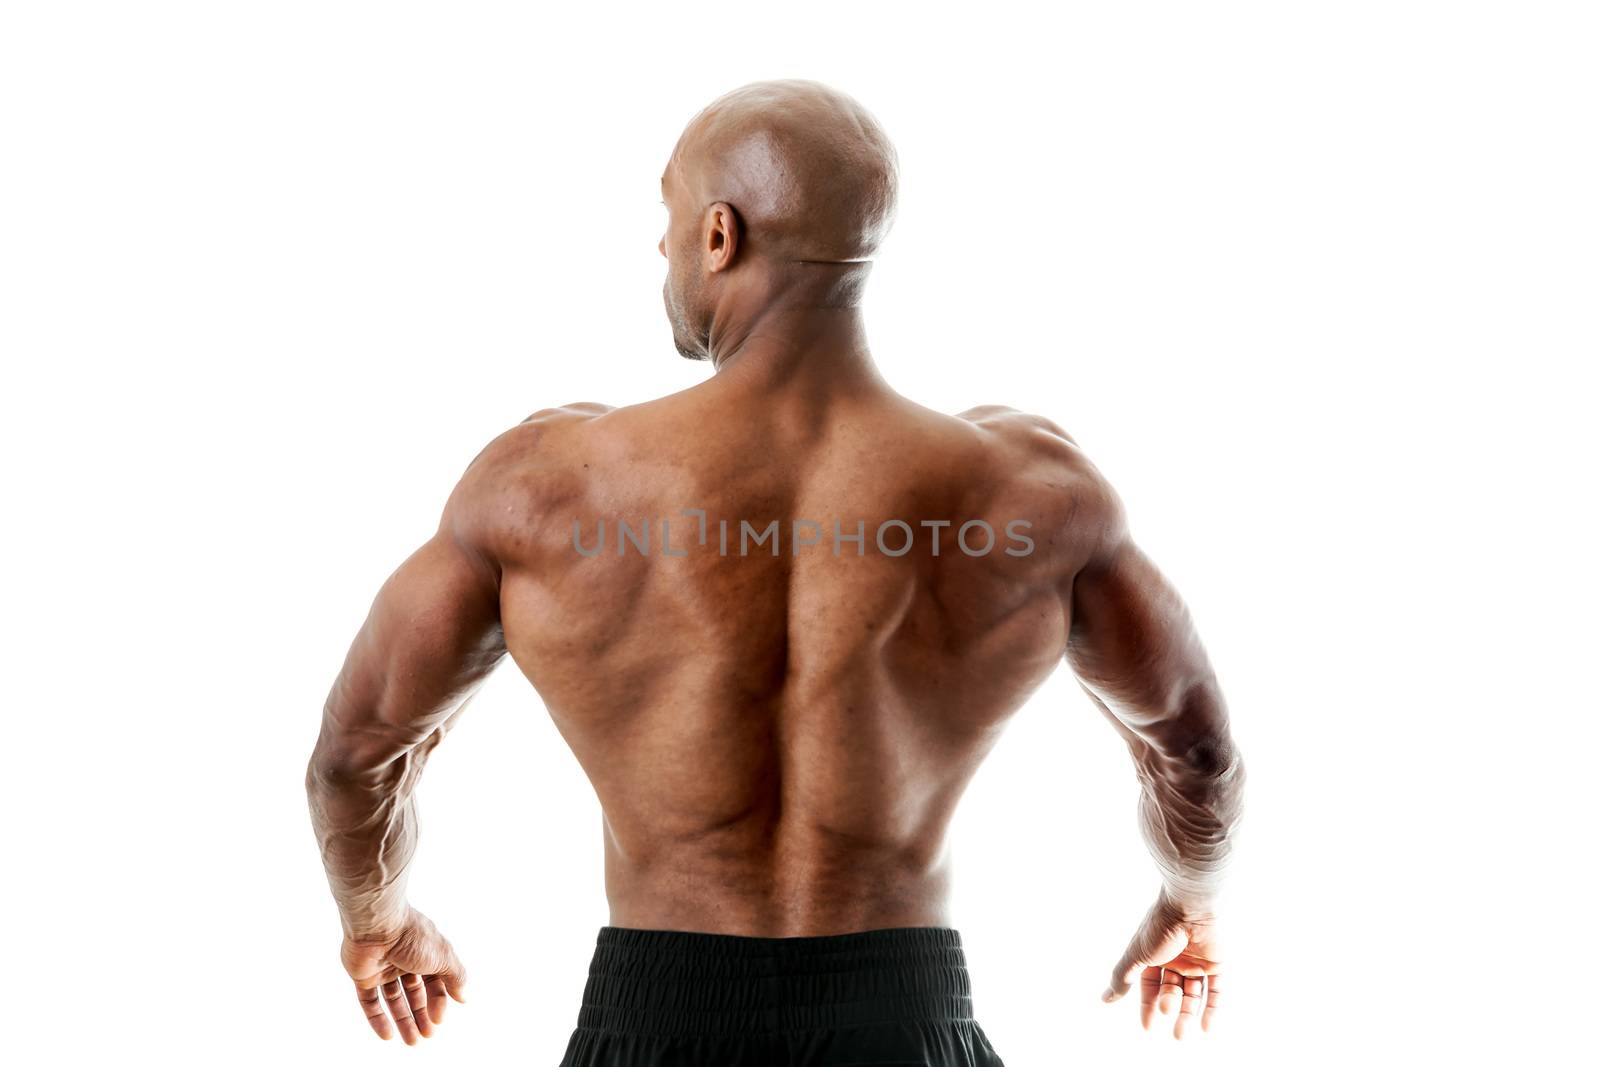 Toned and ripped lean muscle fitness man standing in front of a white background. Shallow depth of field.